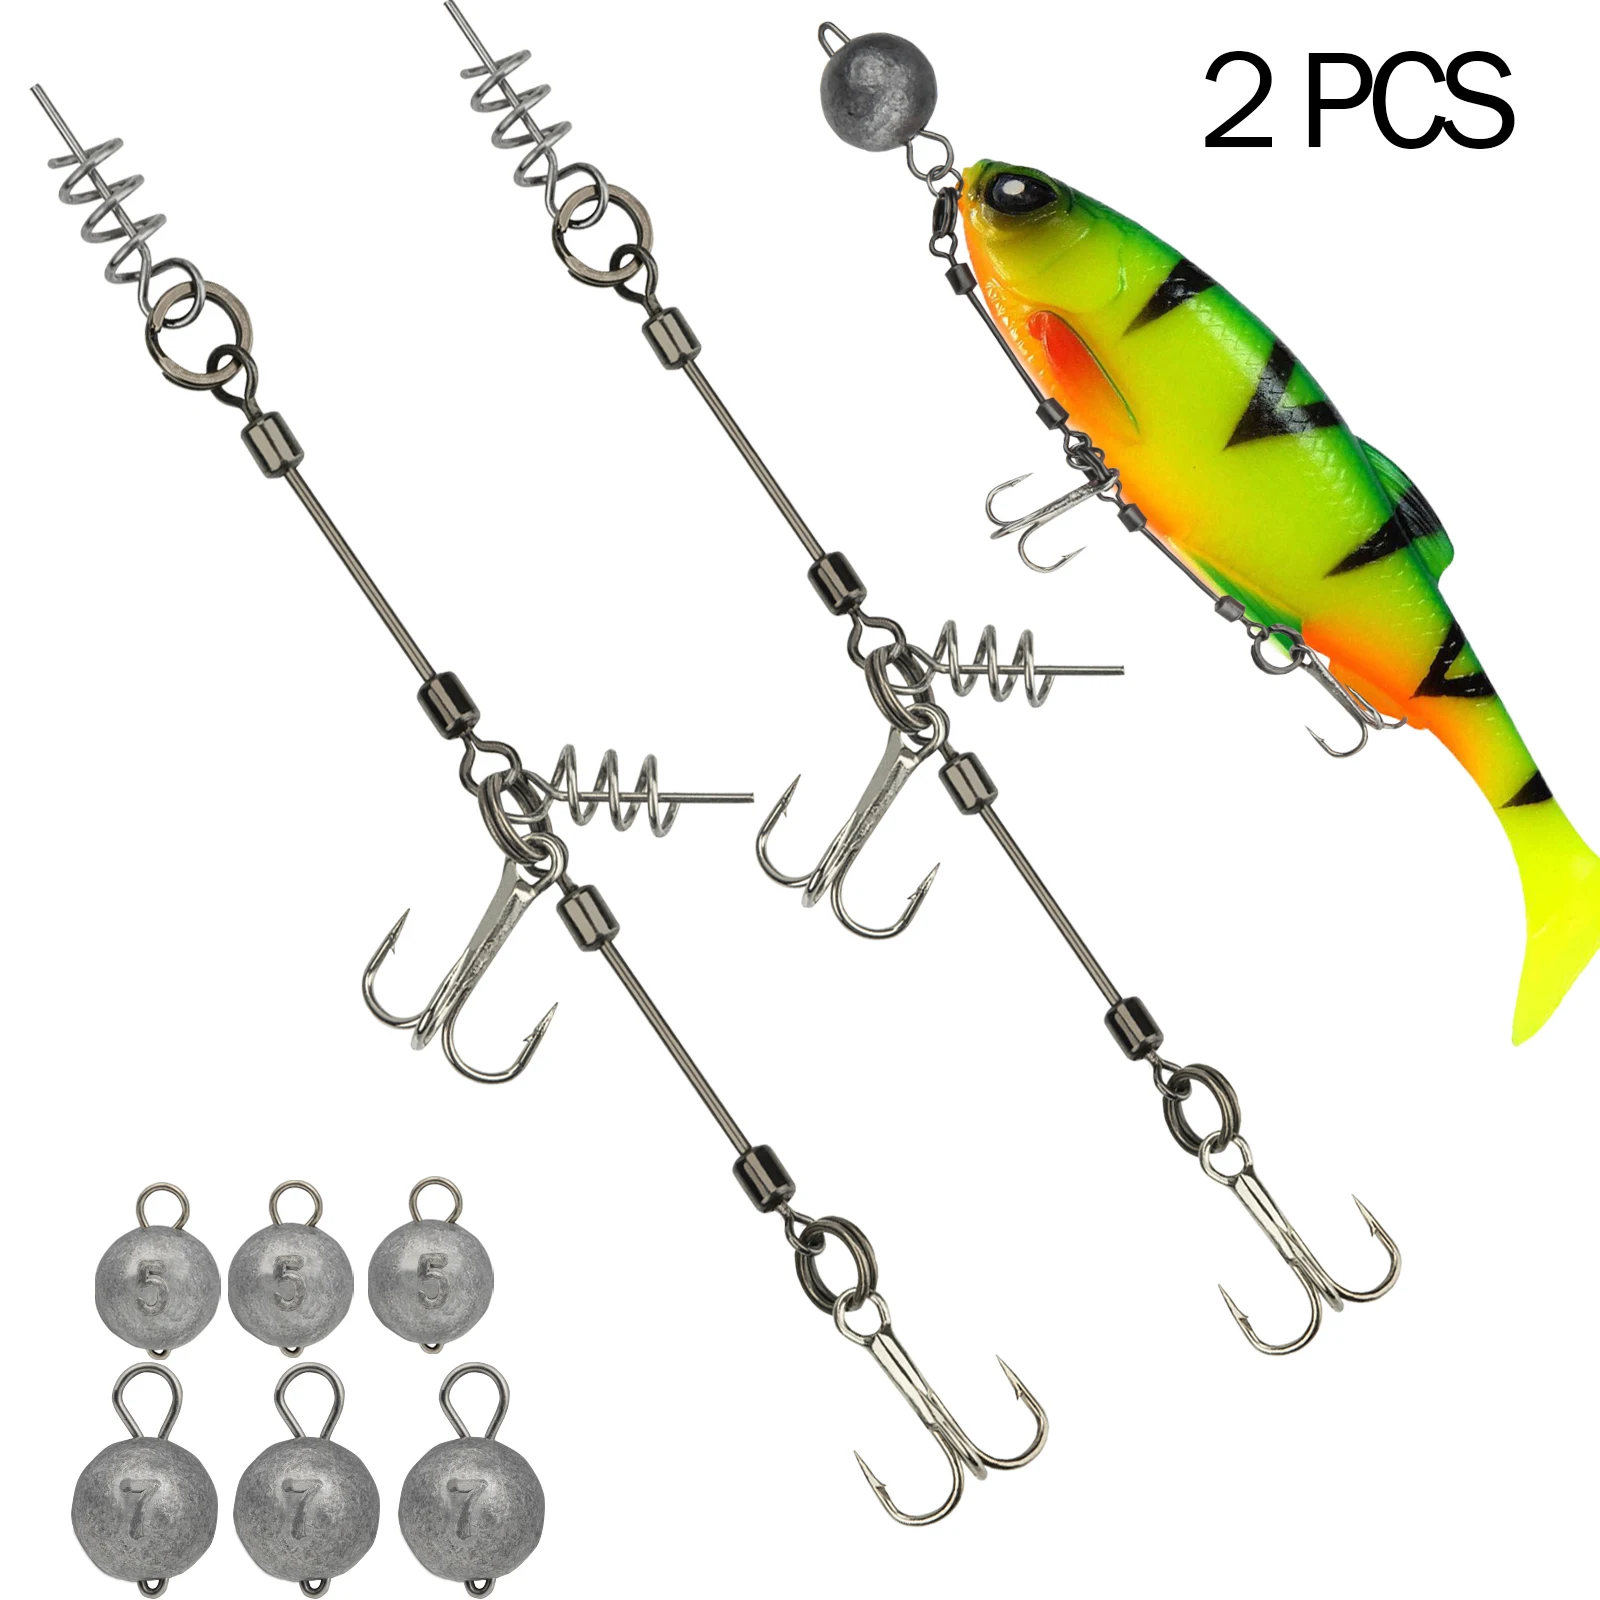 Fishing Treble Hook Steel Wire Group Double Hook With Spring Lock